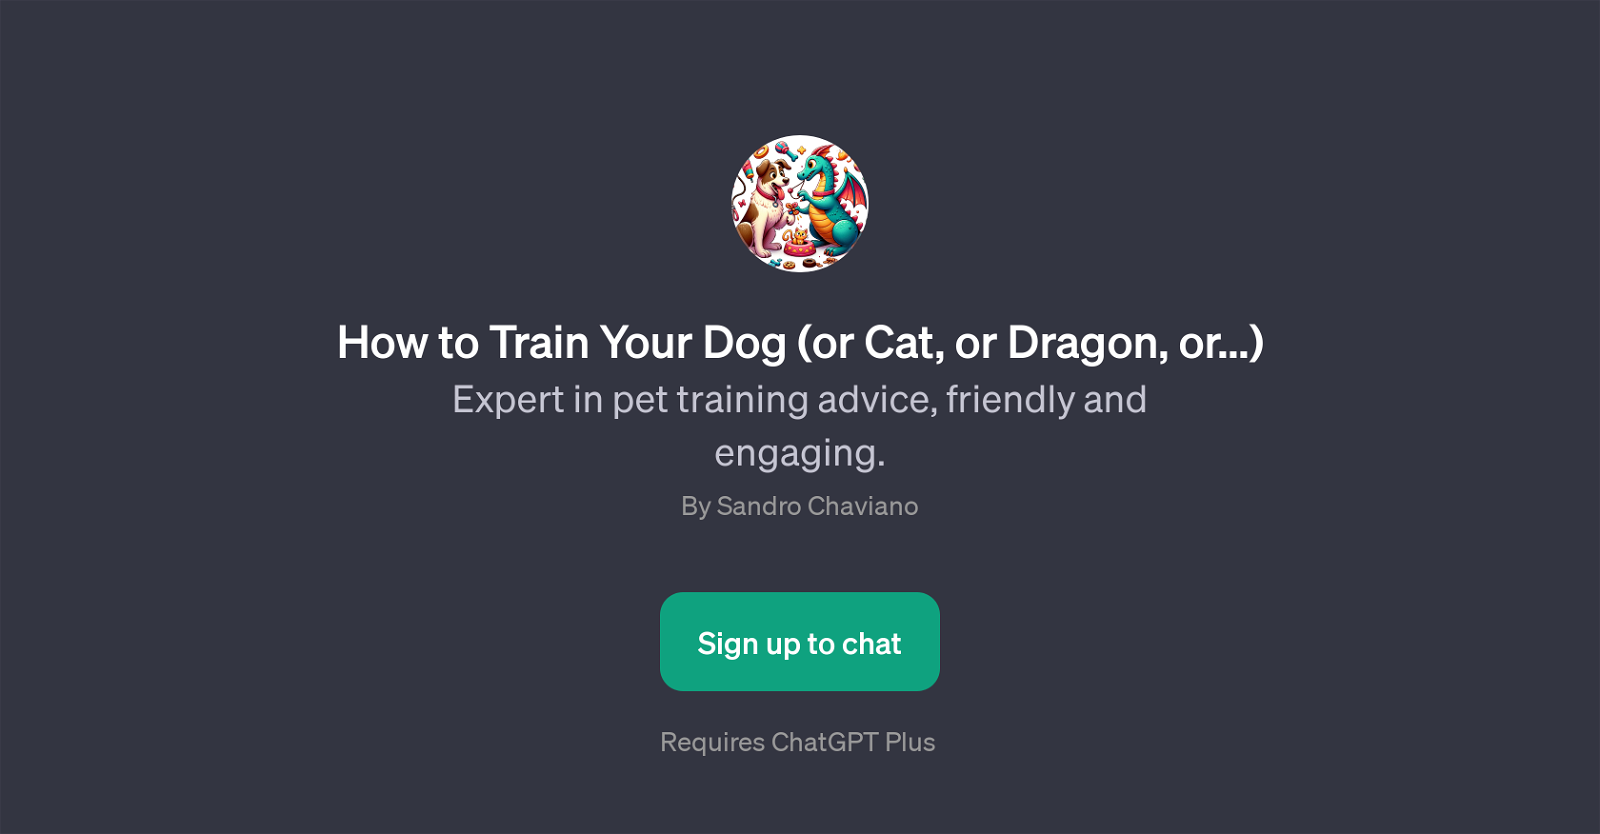 How to Train Your Dog (or Cat, or Dragon, or...) website